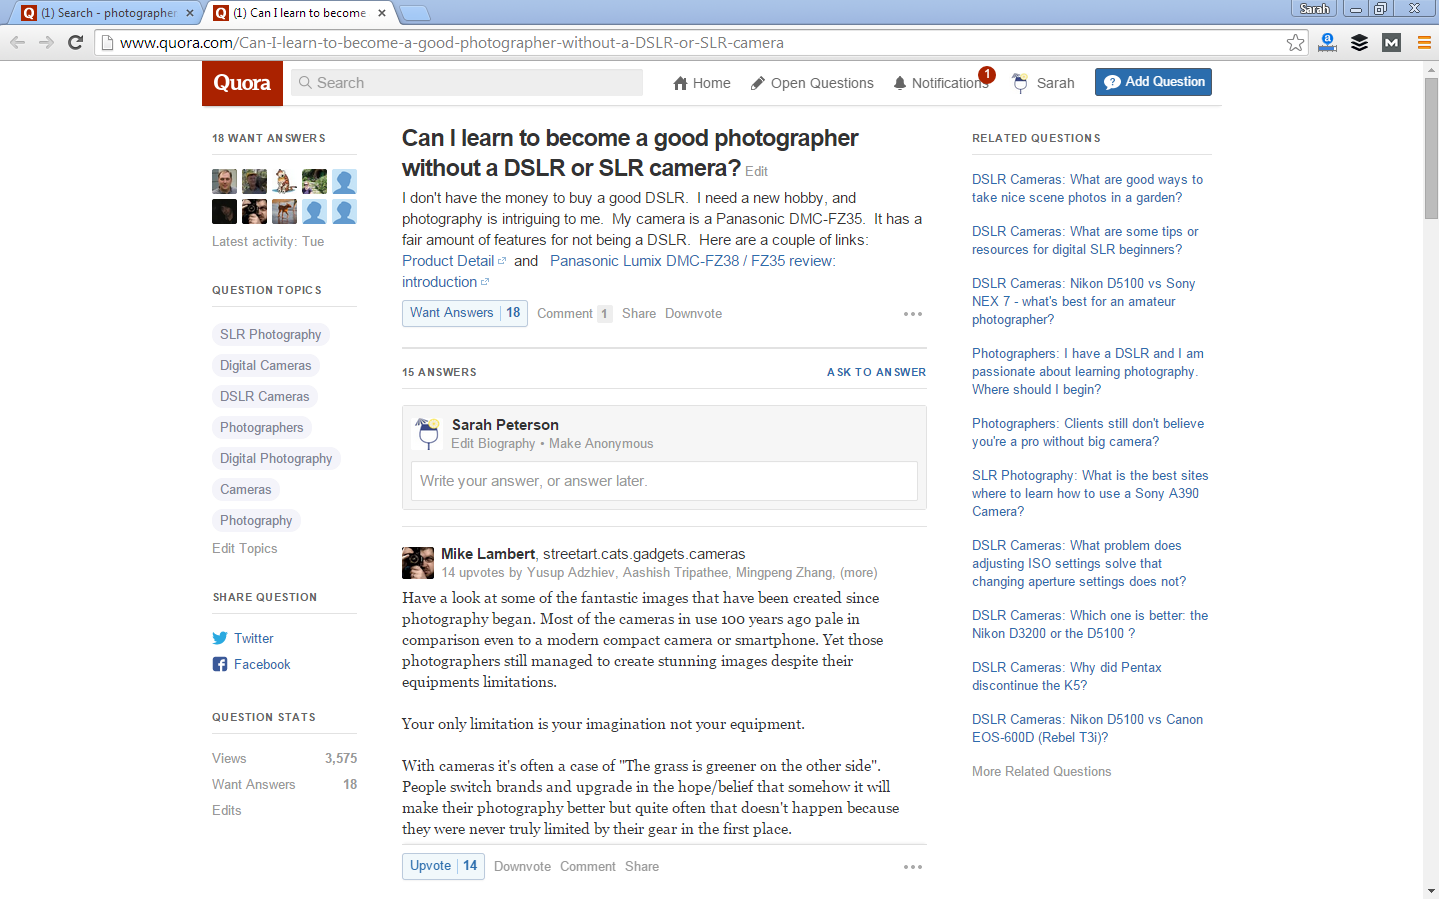 answering questions in Quora